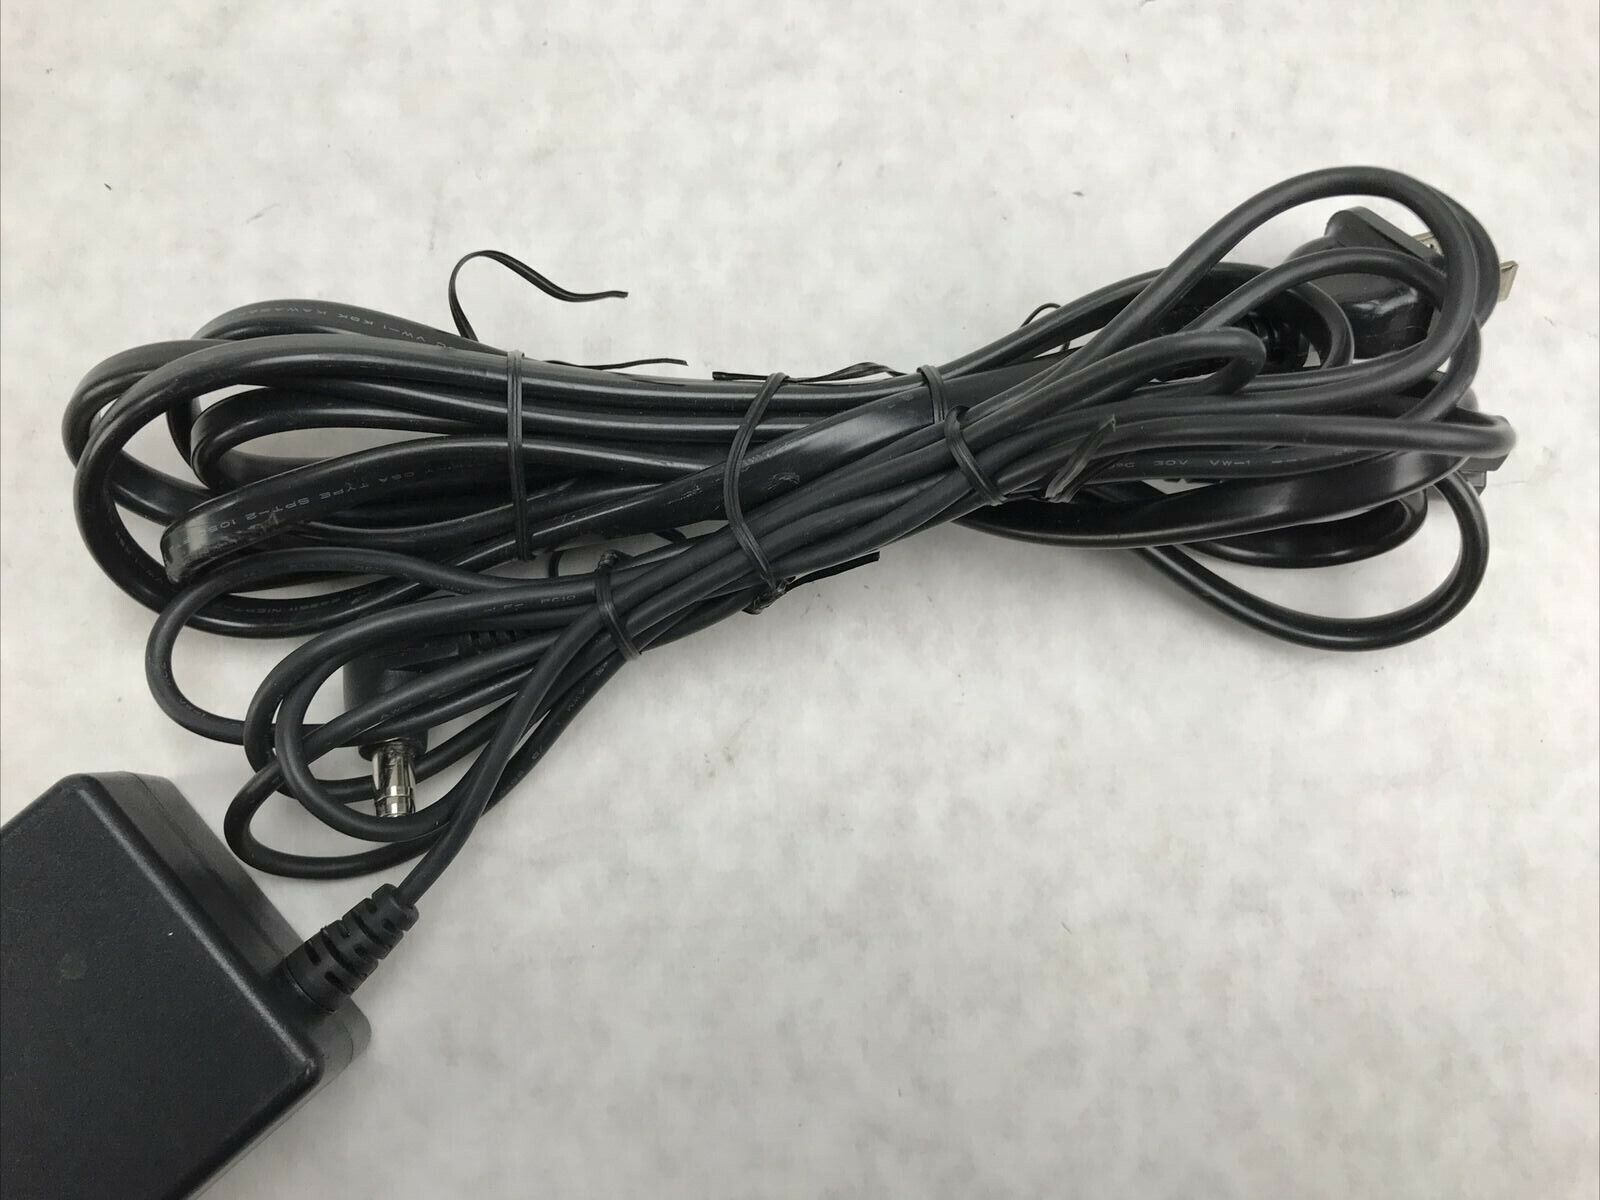 Fujitsu AC Adapter CA01007-0930 Laptop Charger 19V 3.16A 60W with Power Cord